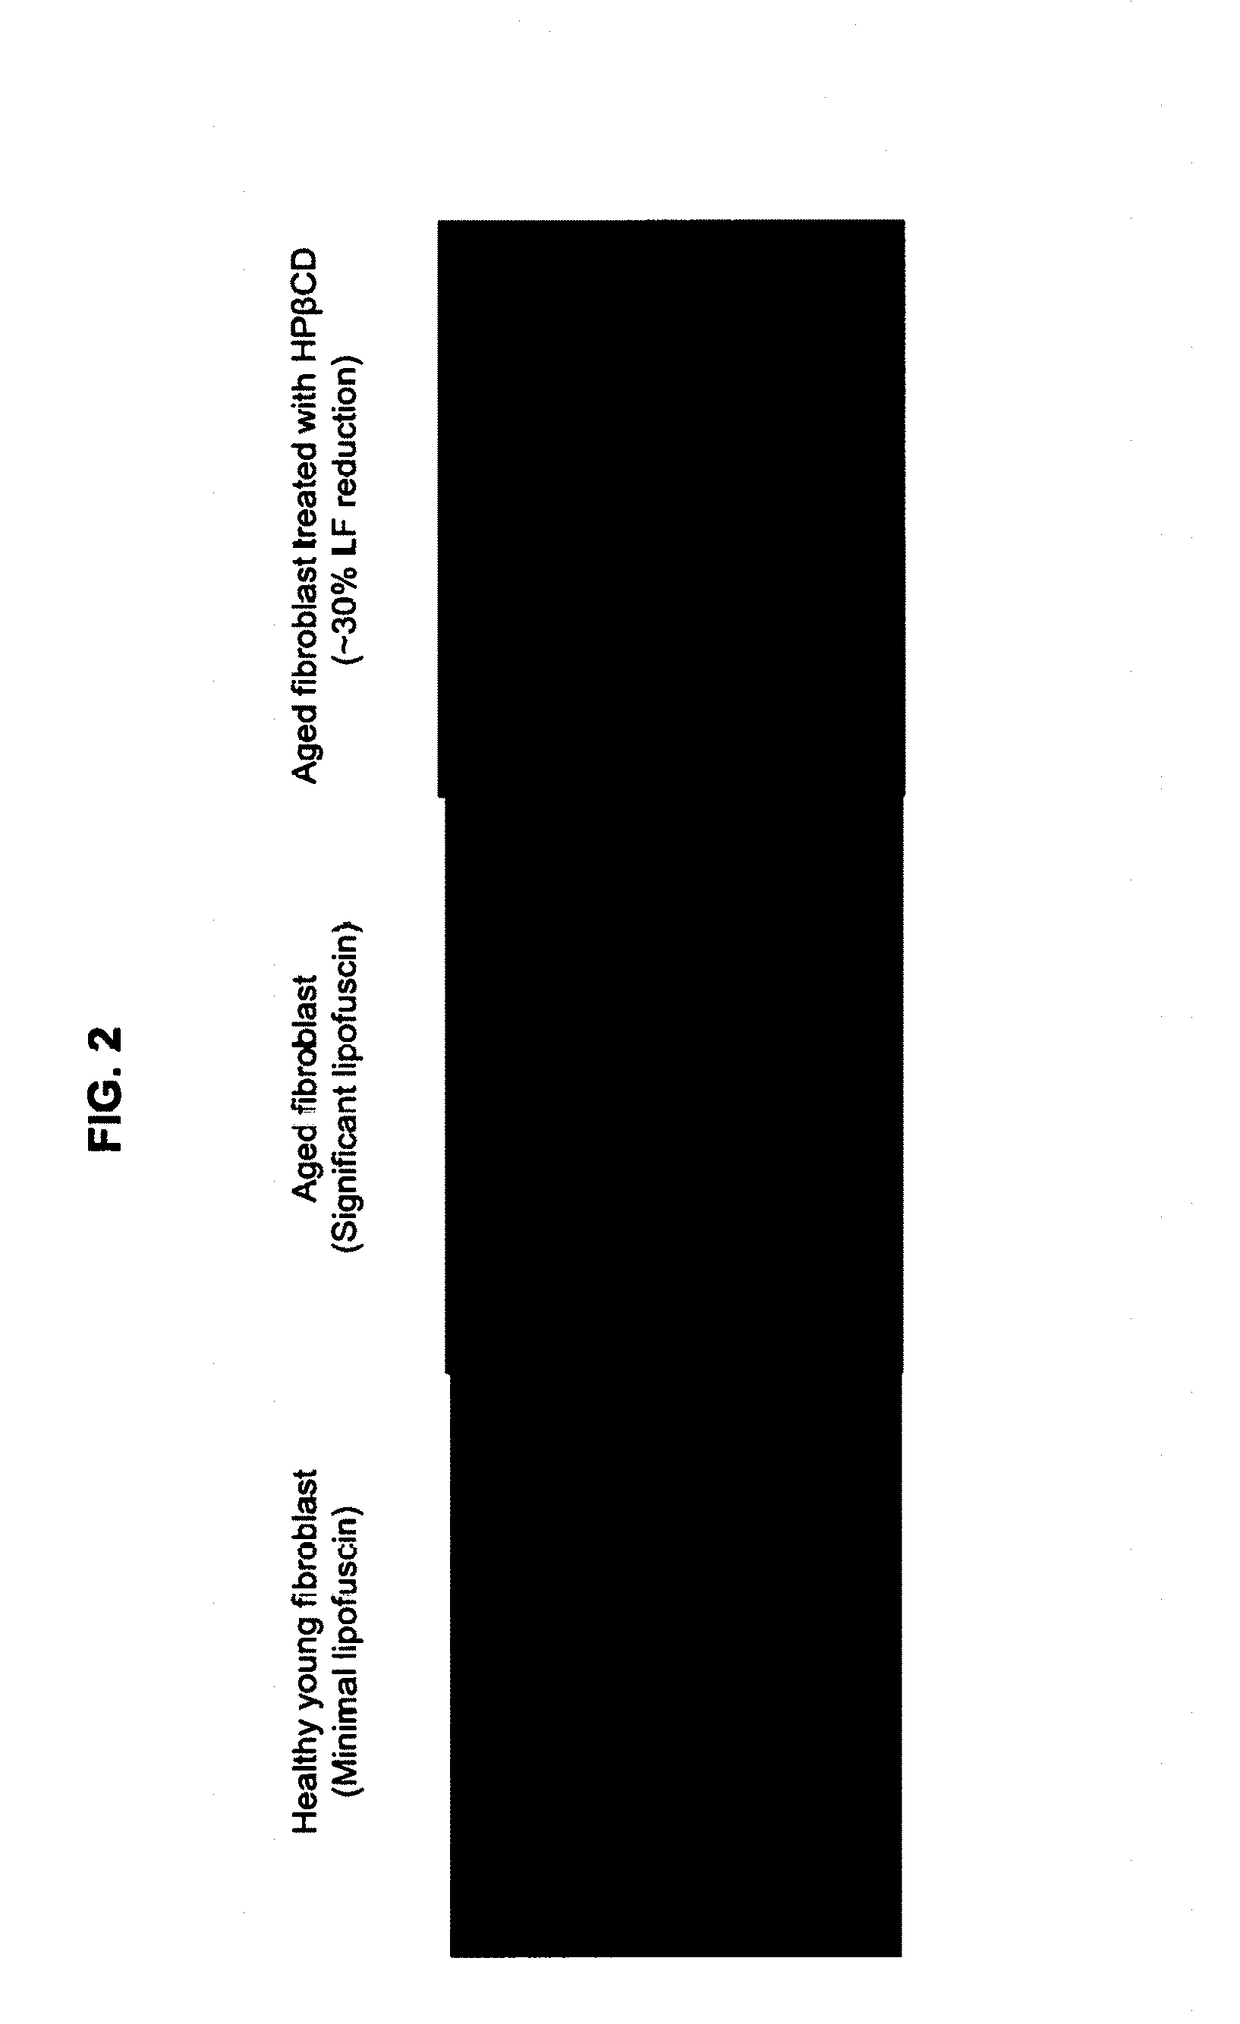 Cyclodextrin compounds for the prevention and treatment of aging